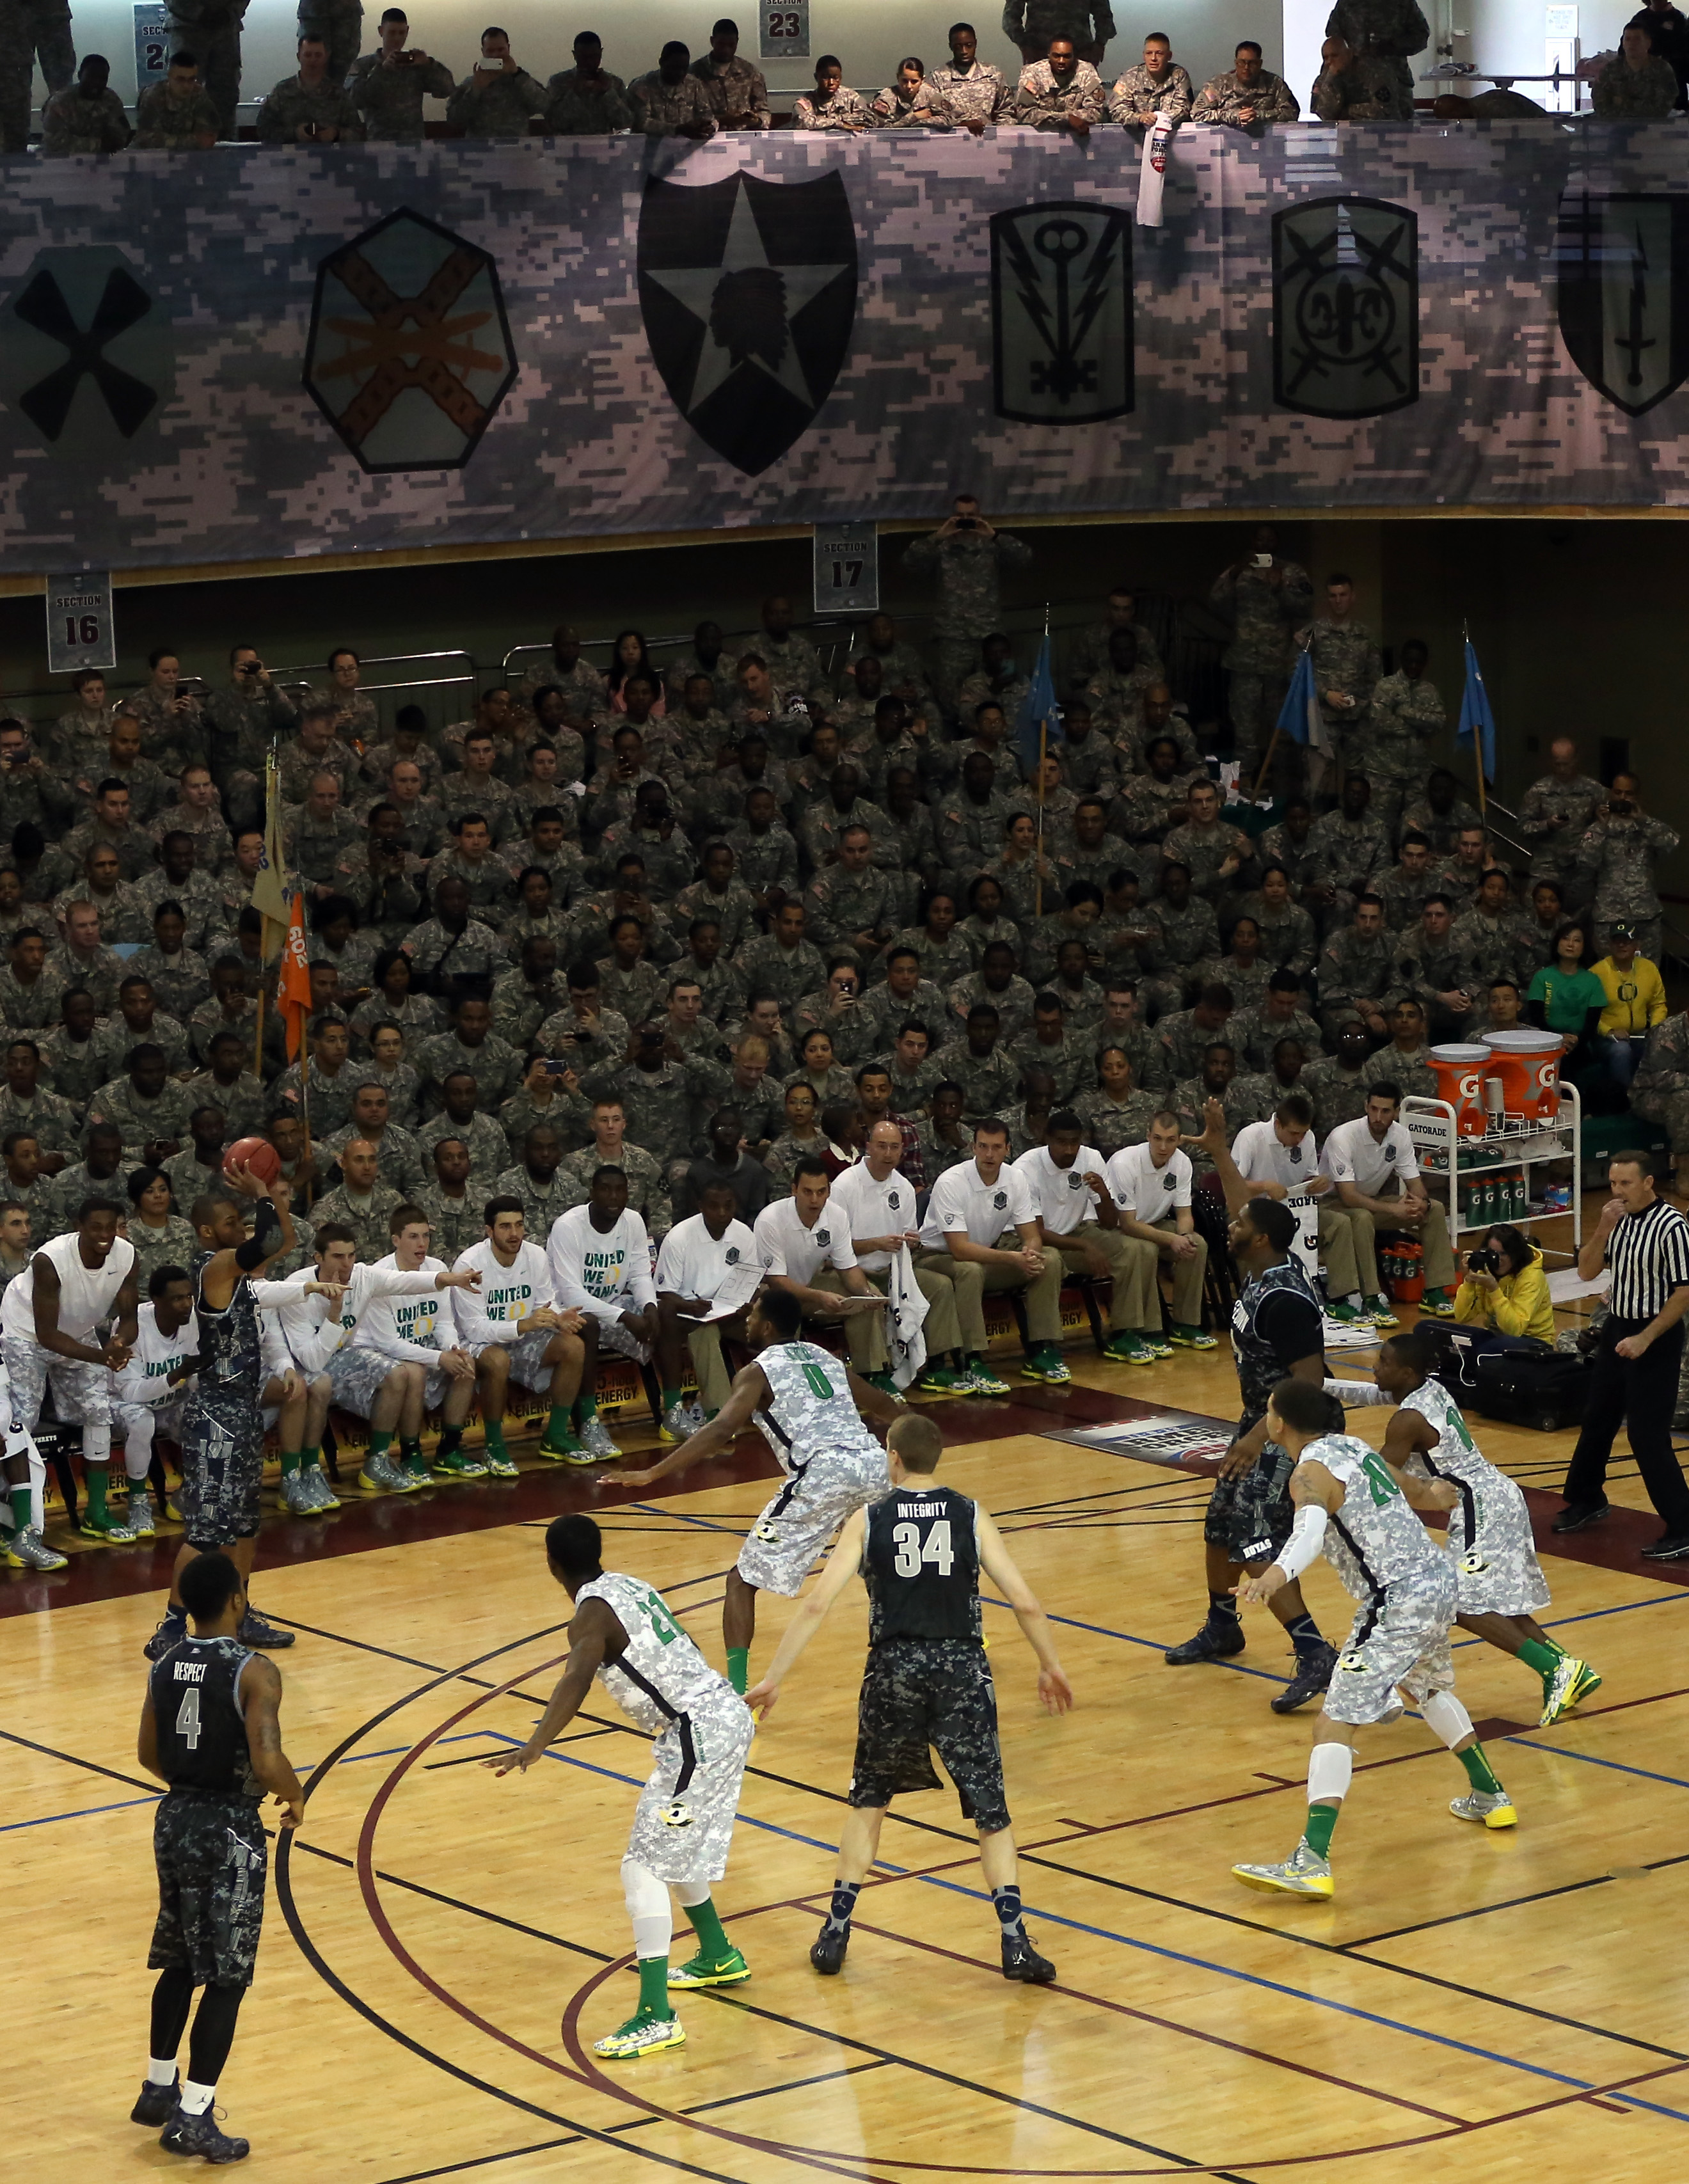 To honor the men and women of the U.S. military, Oregon and Georgetown opened their college basketball season in a U.S. army base in Korea. (Yonhap)